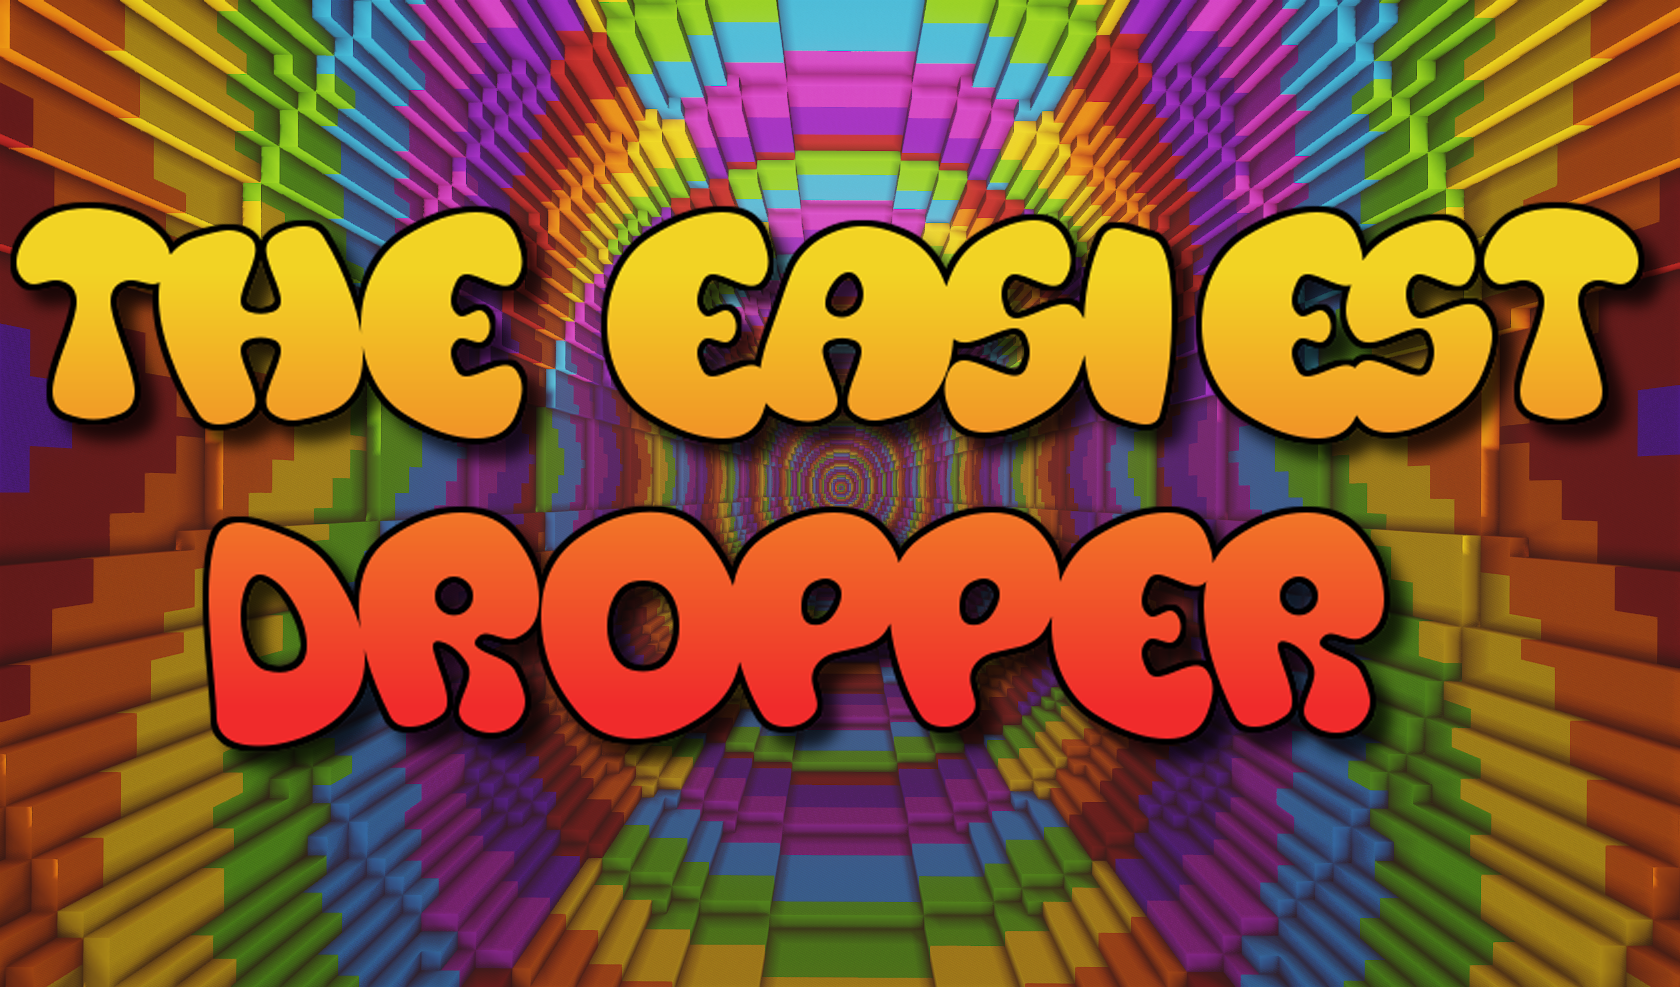 Download The Easiest Dropper for Minecraft 1.16.5